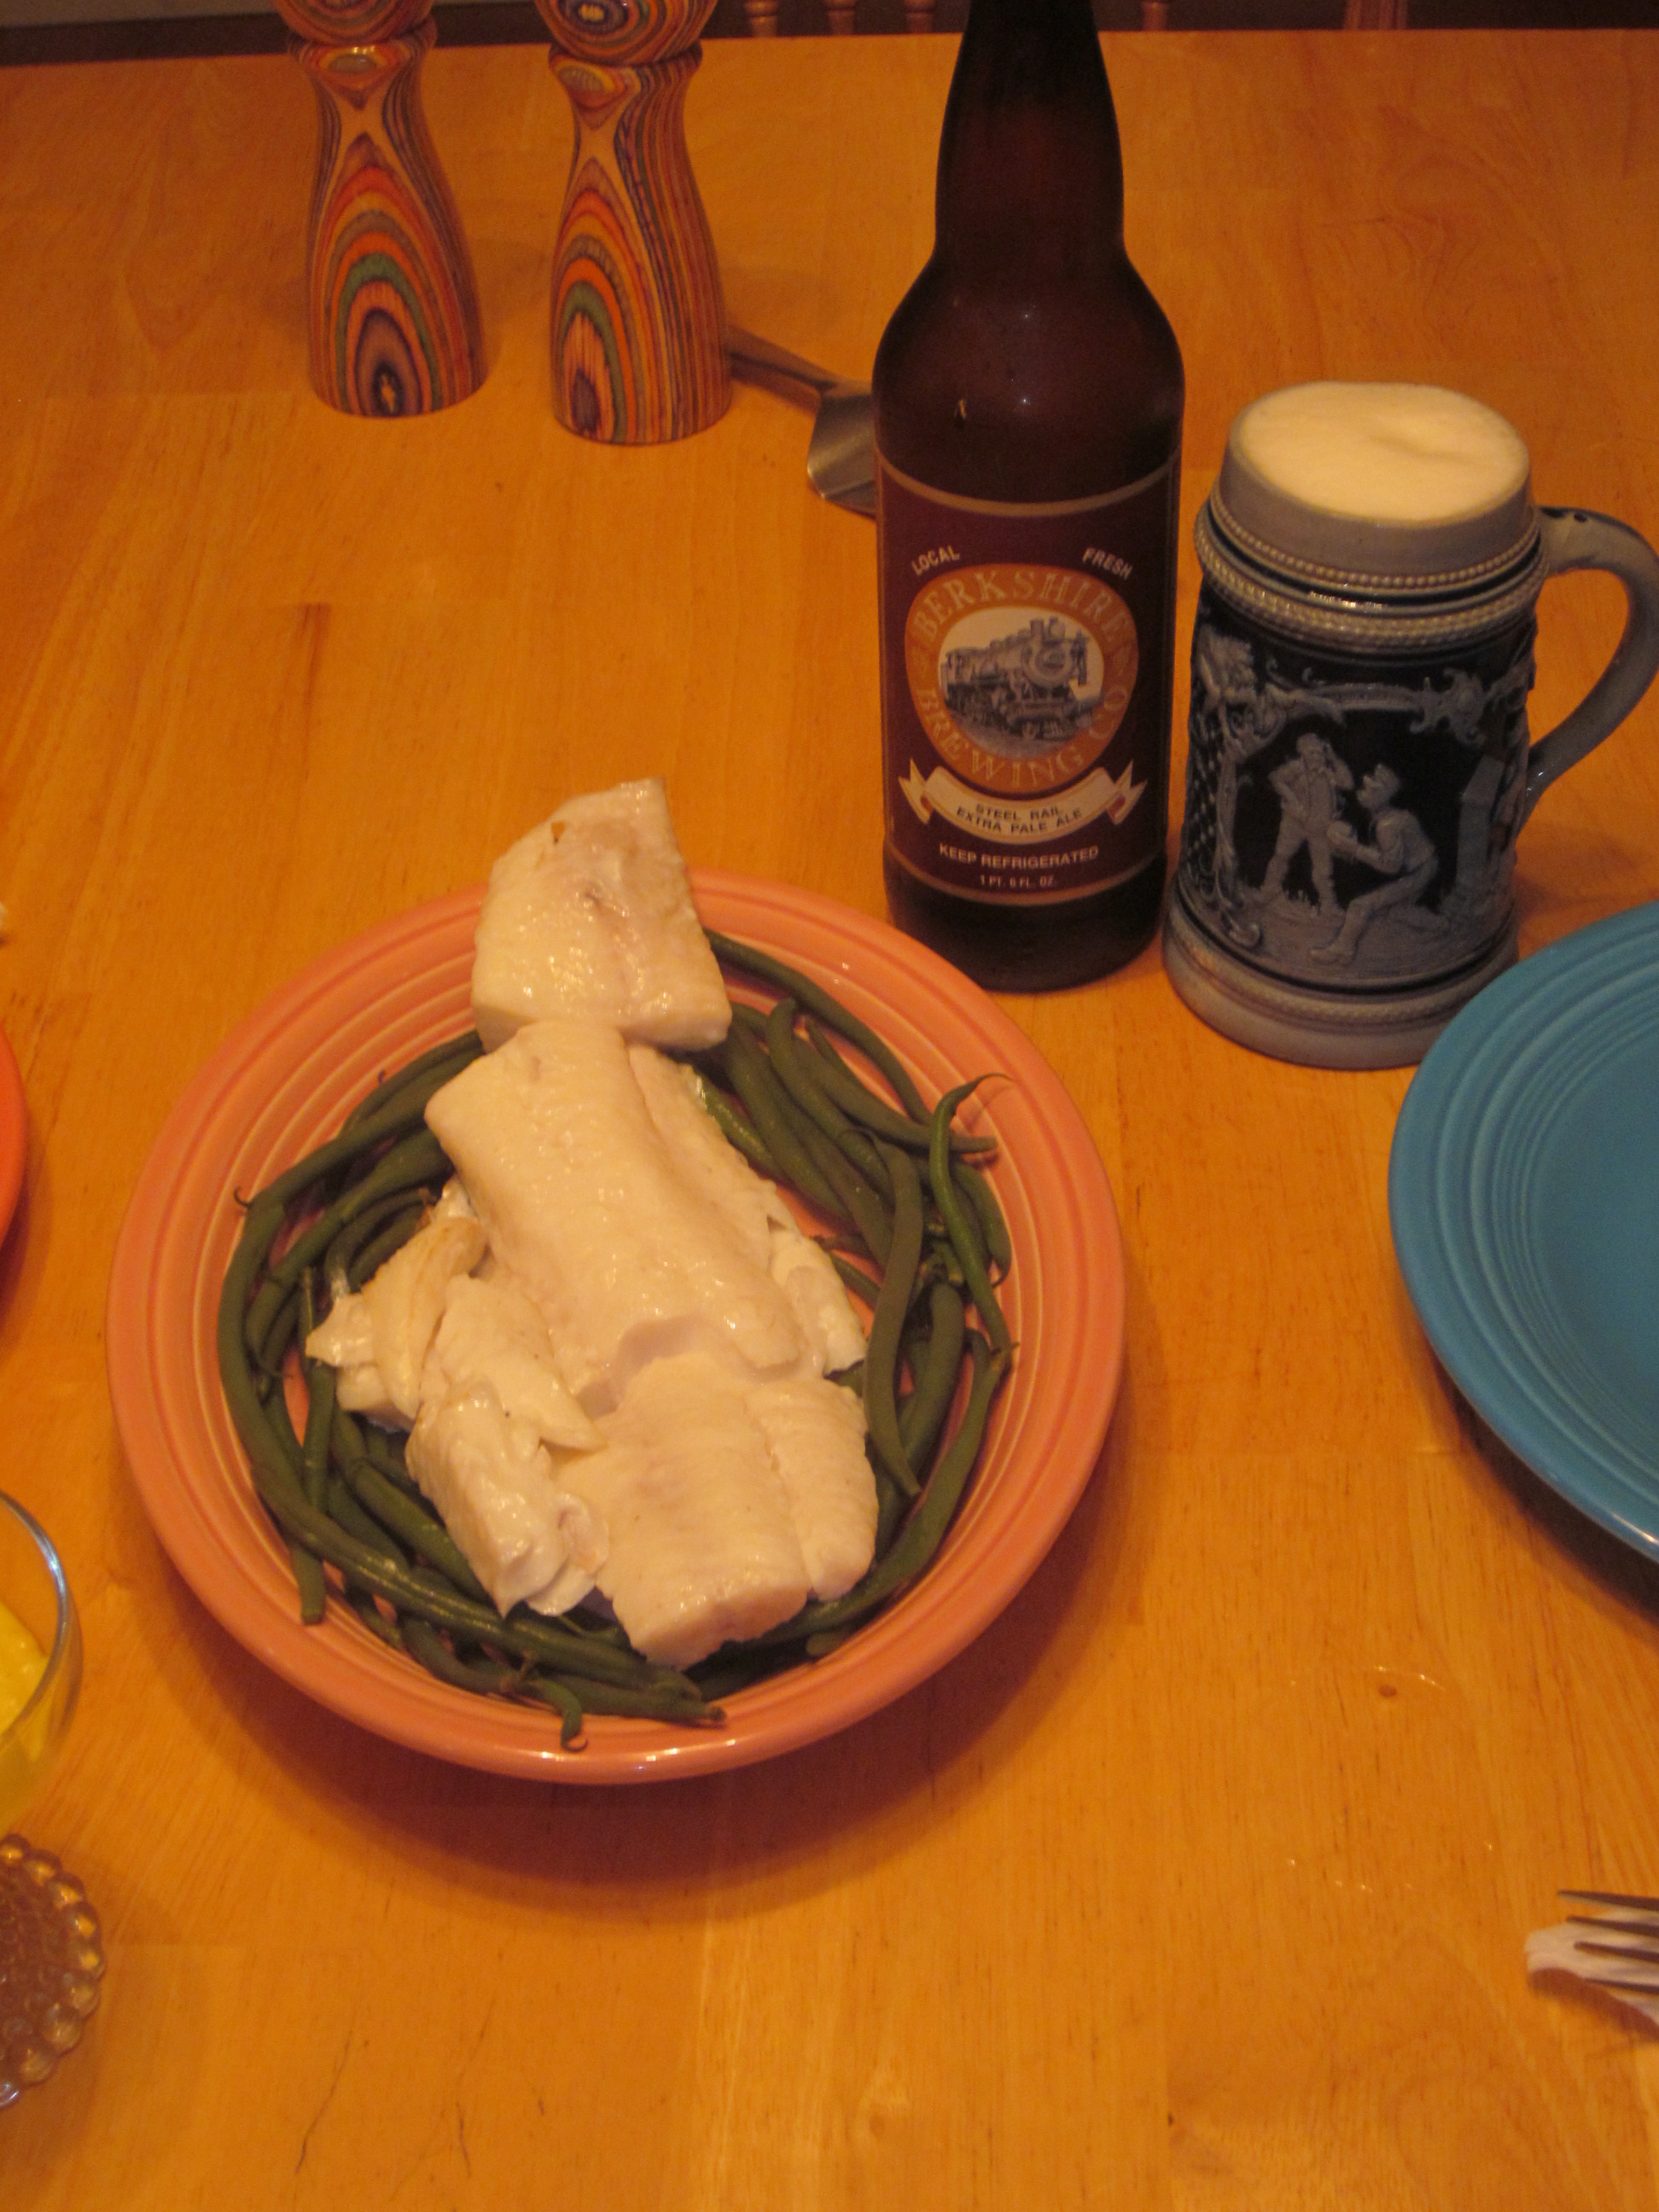 Pale Ale and Haddock